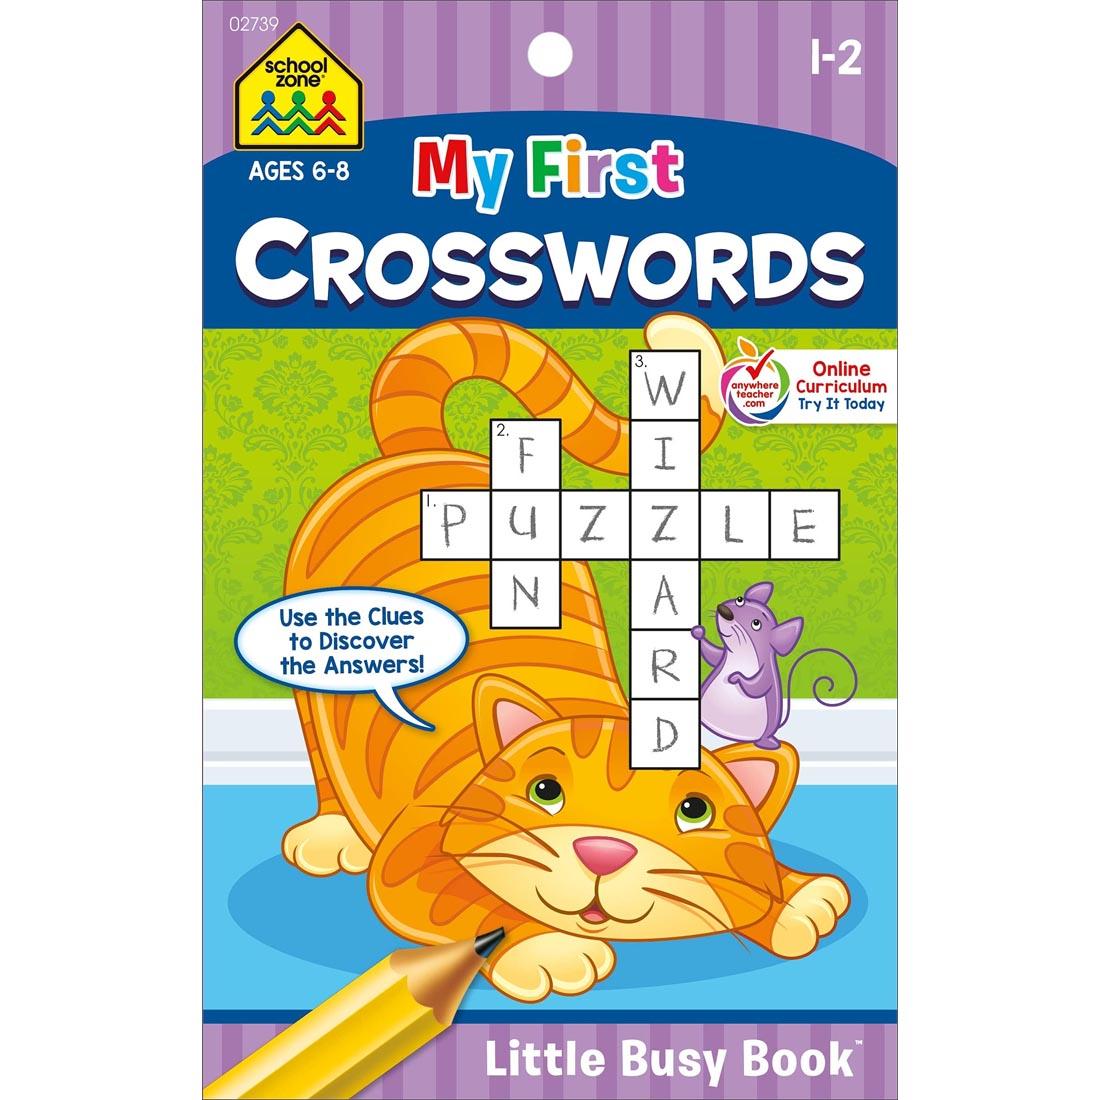 Cover of School Zone My First Crosswords Little Busy Book